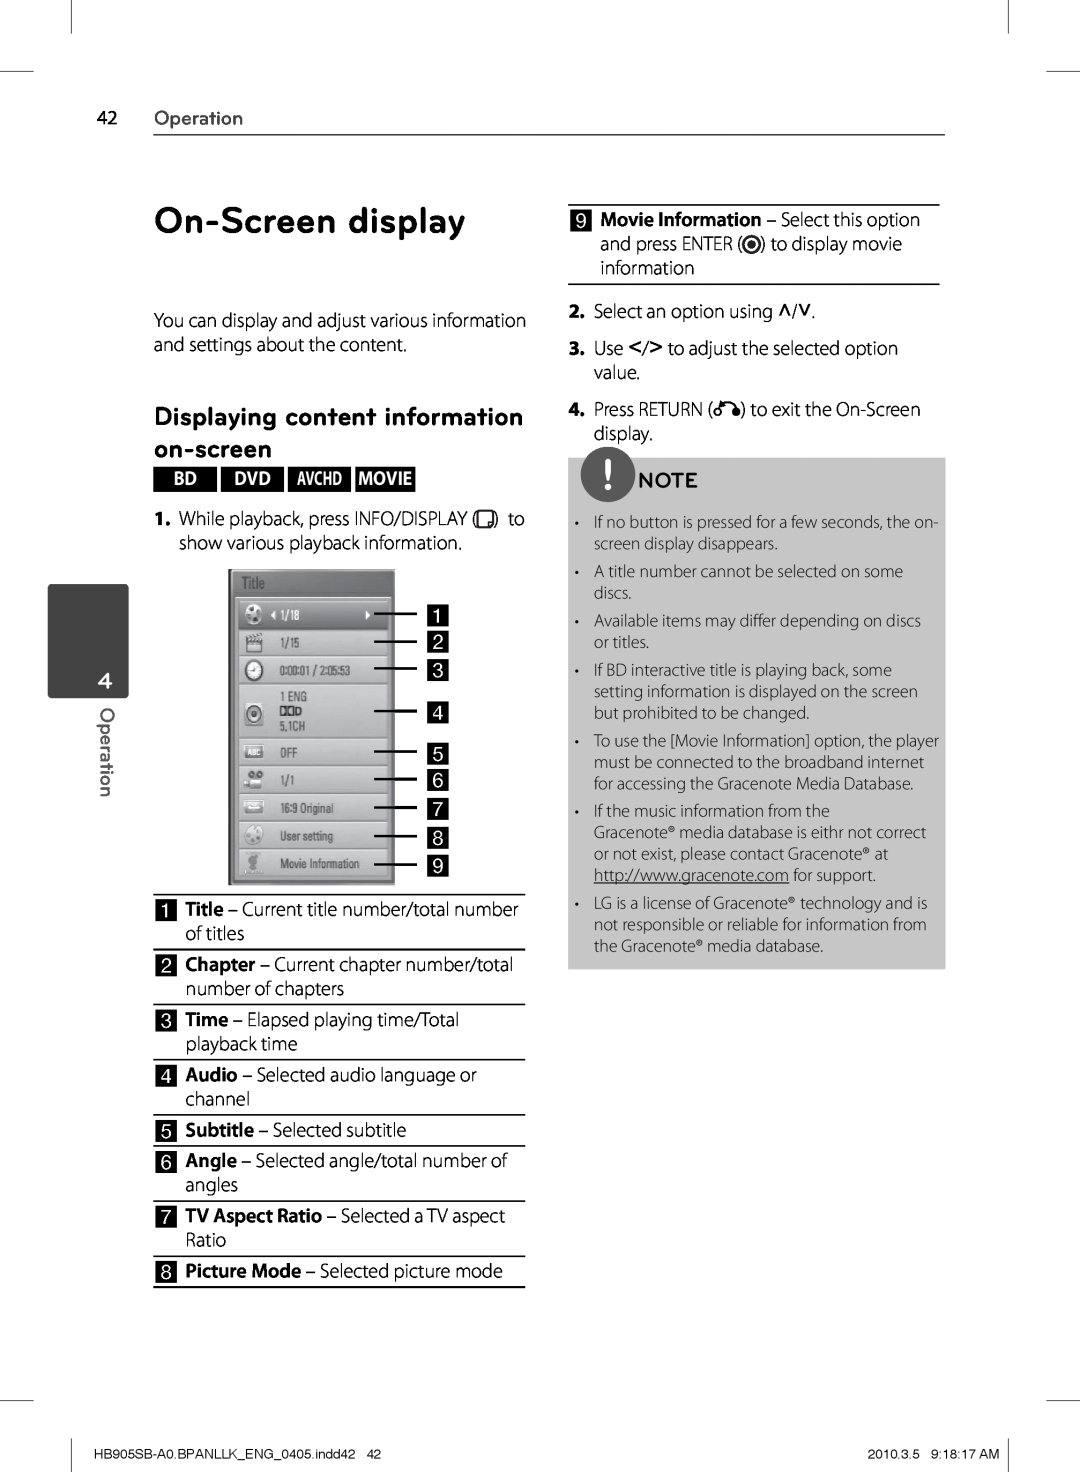 LG Electronics HB905SB On-Screendisplay, Displaying content information on-screen, Operation, Bd Dvd Avchd Movie 